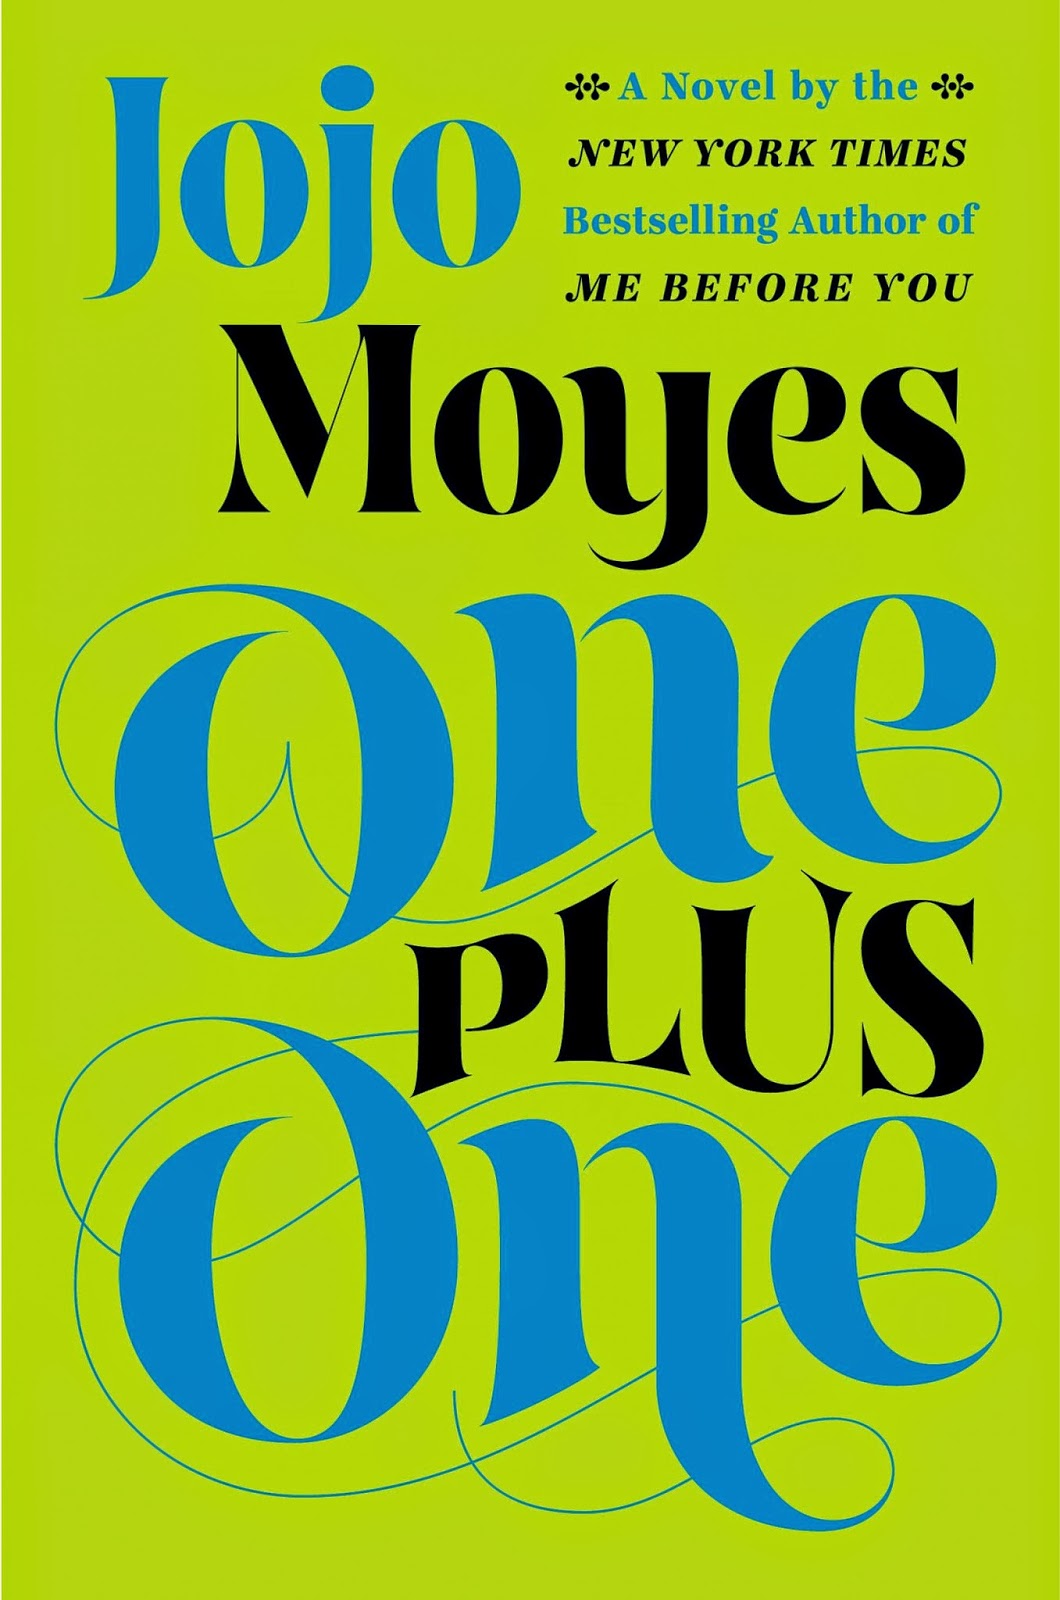 http://literatelystylish.blogspot.com/2014/08/book-review-one-one.html